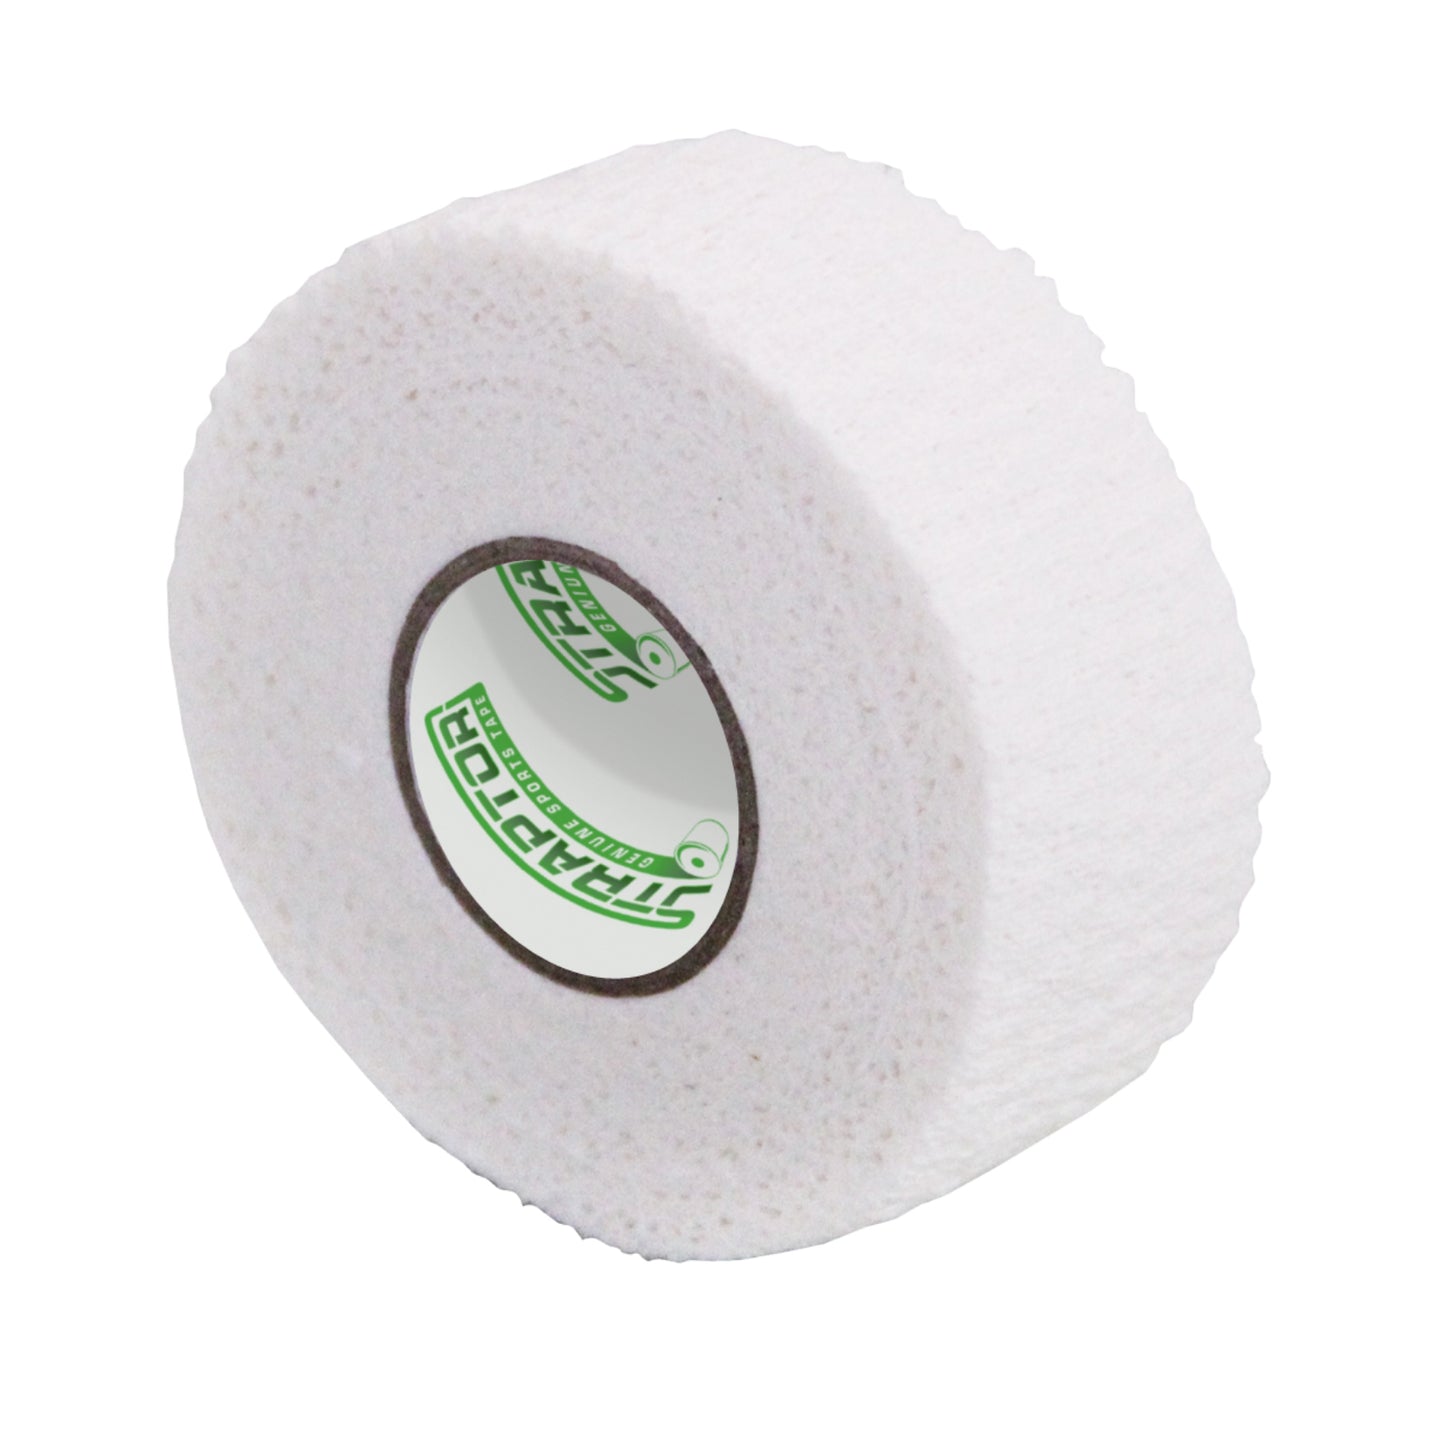 Hand Tearable Stretch Tape White 25mm x 6.9m - Straptor (48)